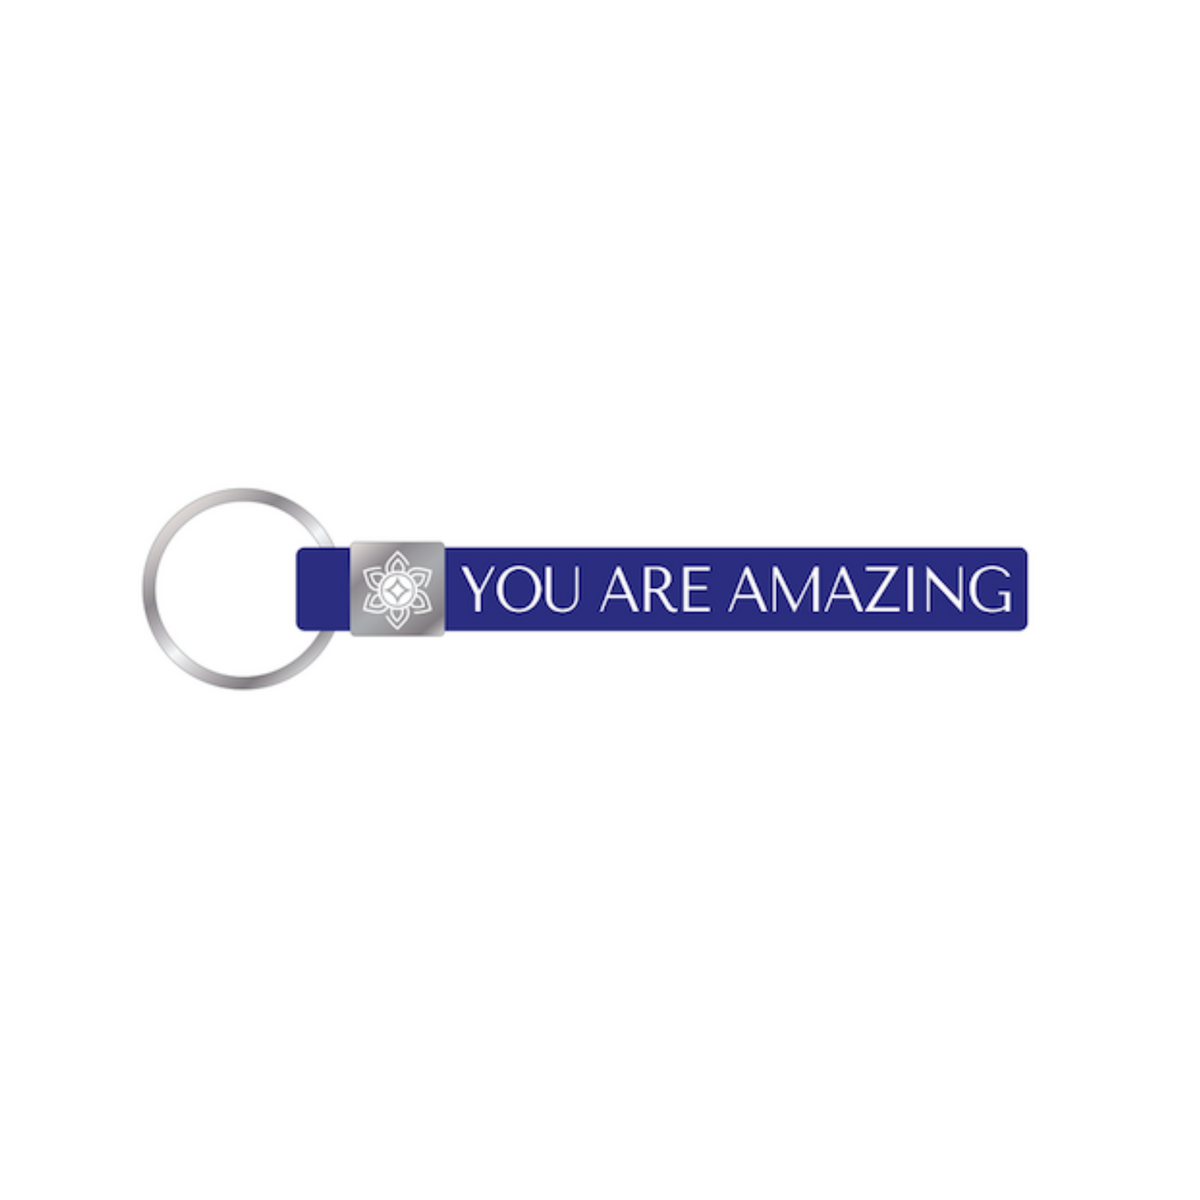 You are Amazing (Keychain)